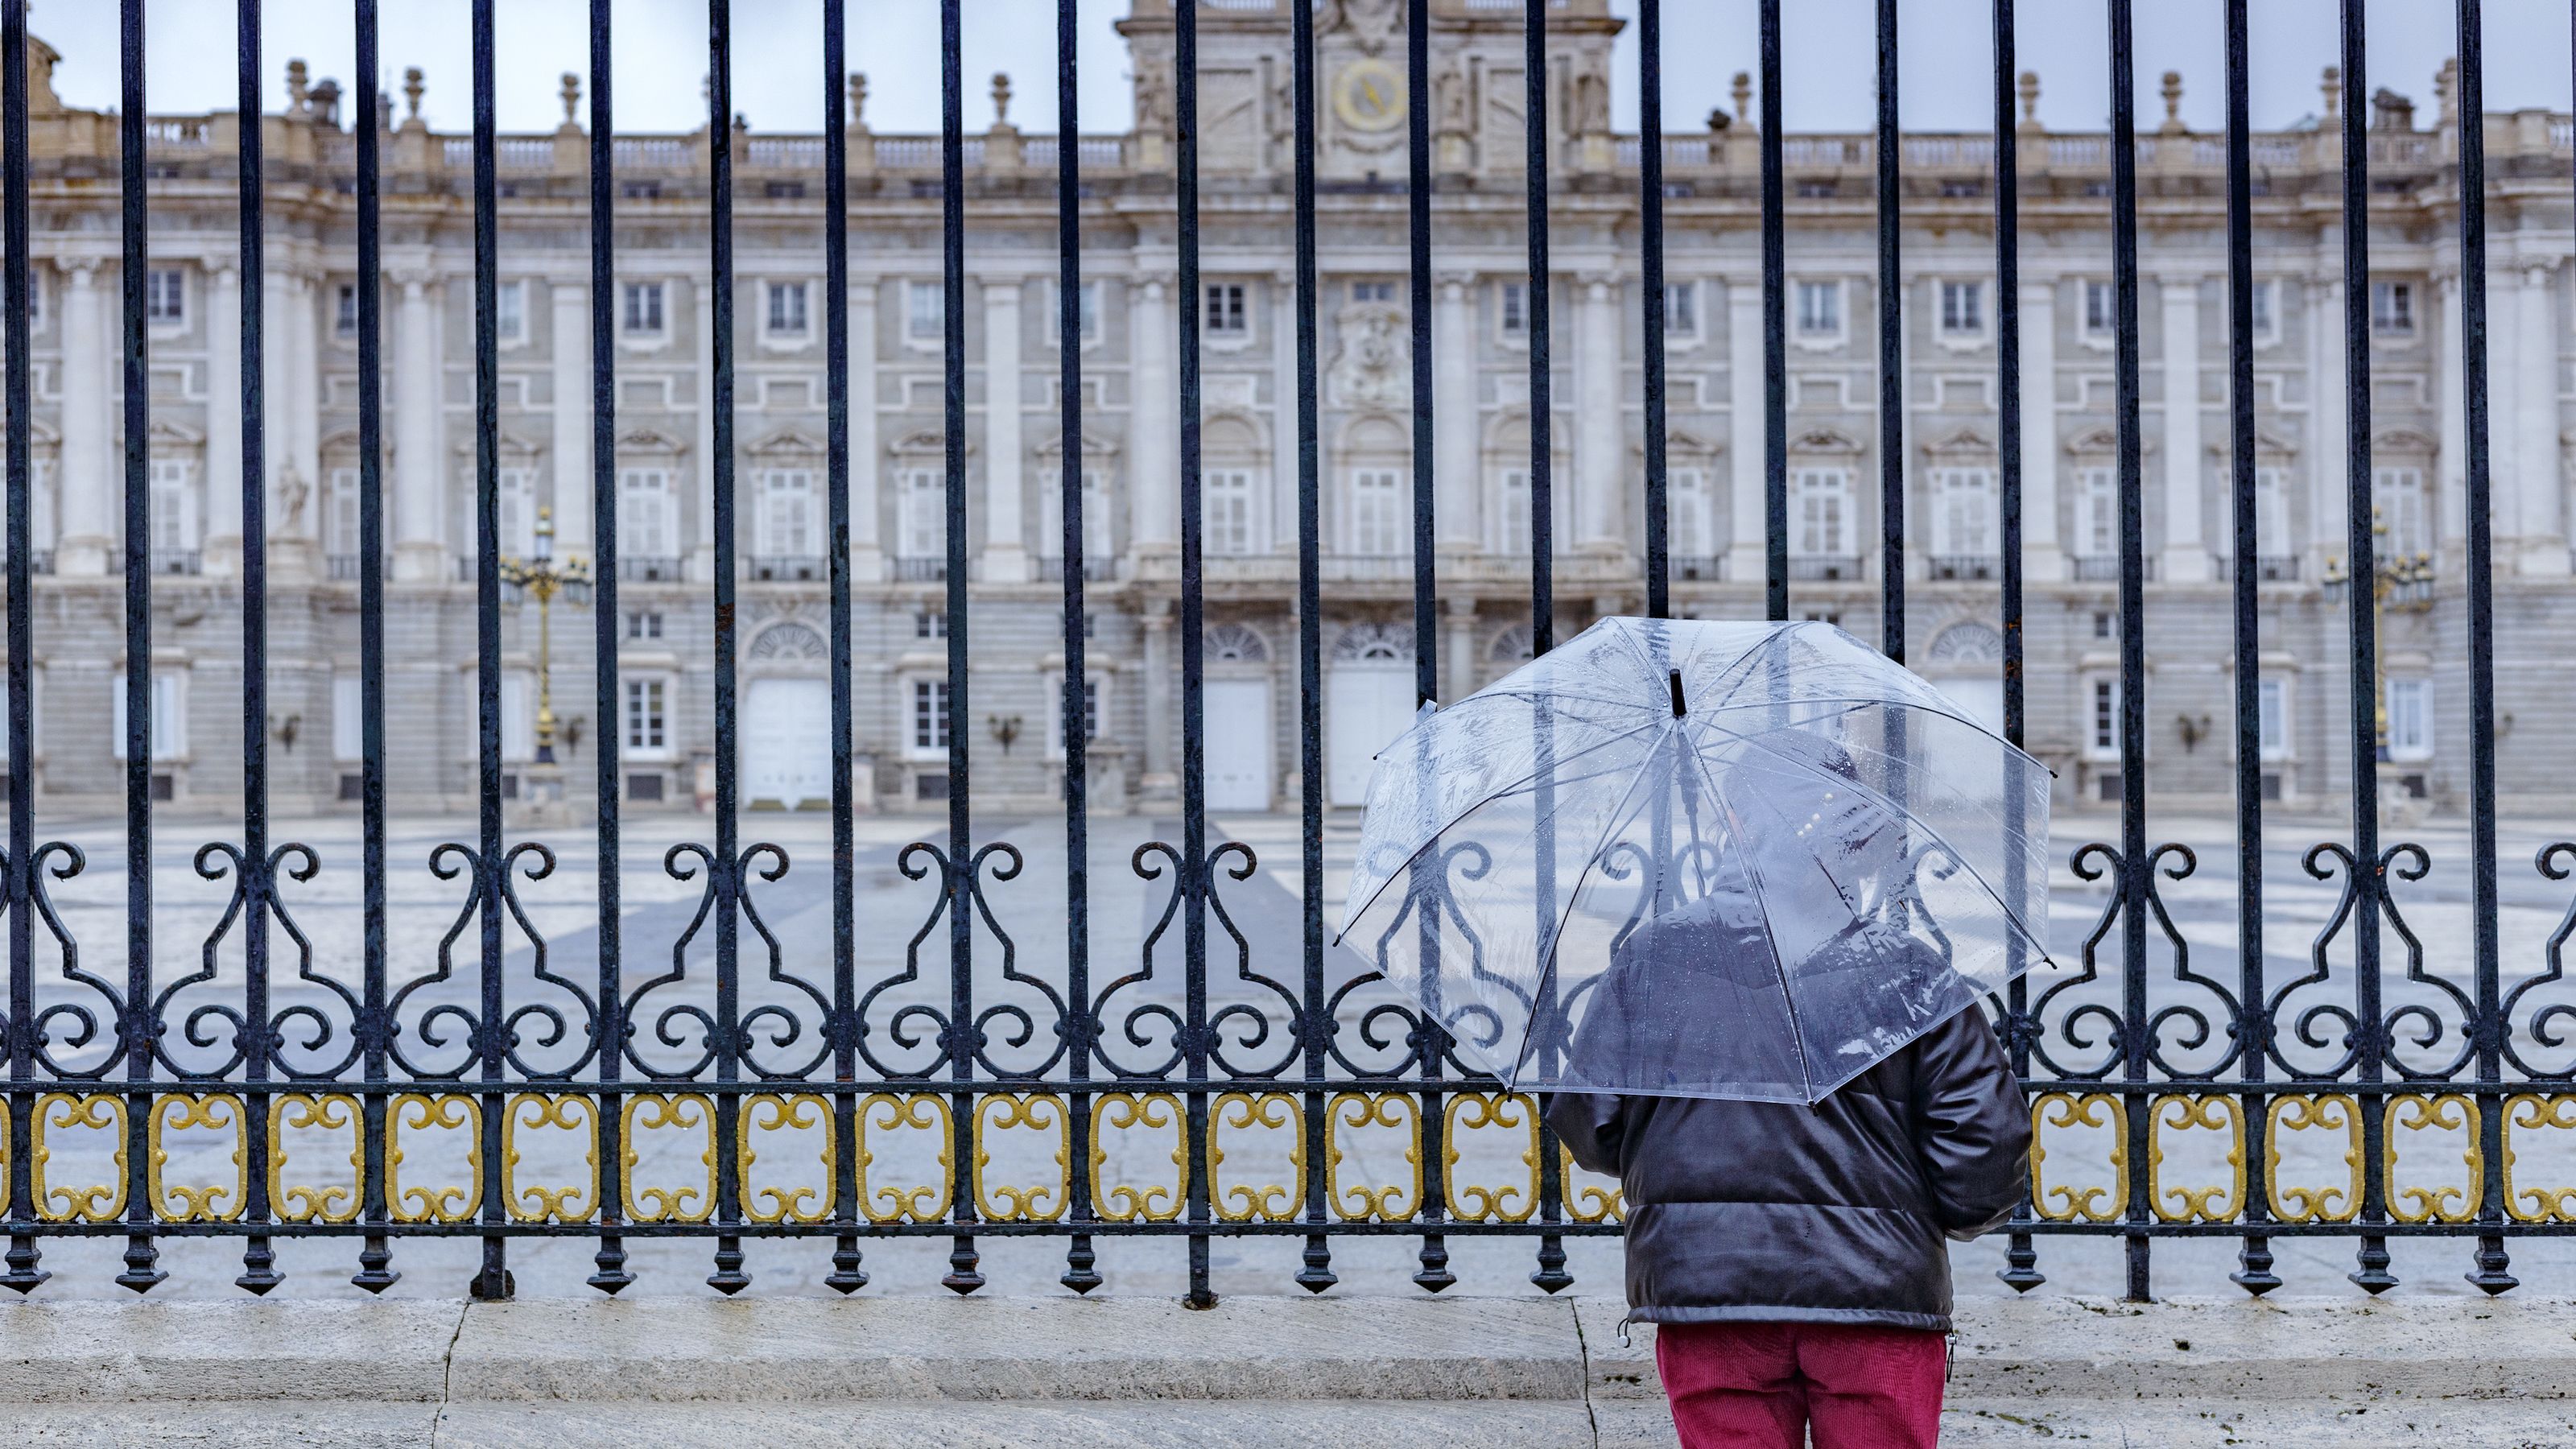 Stay dry on your next vacation with one of these 23 travel umbrellas | CNN Underscored